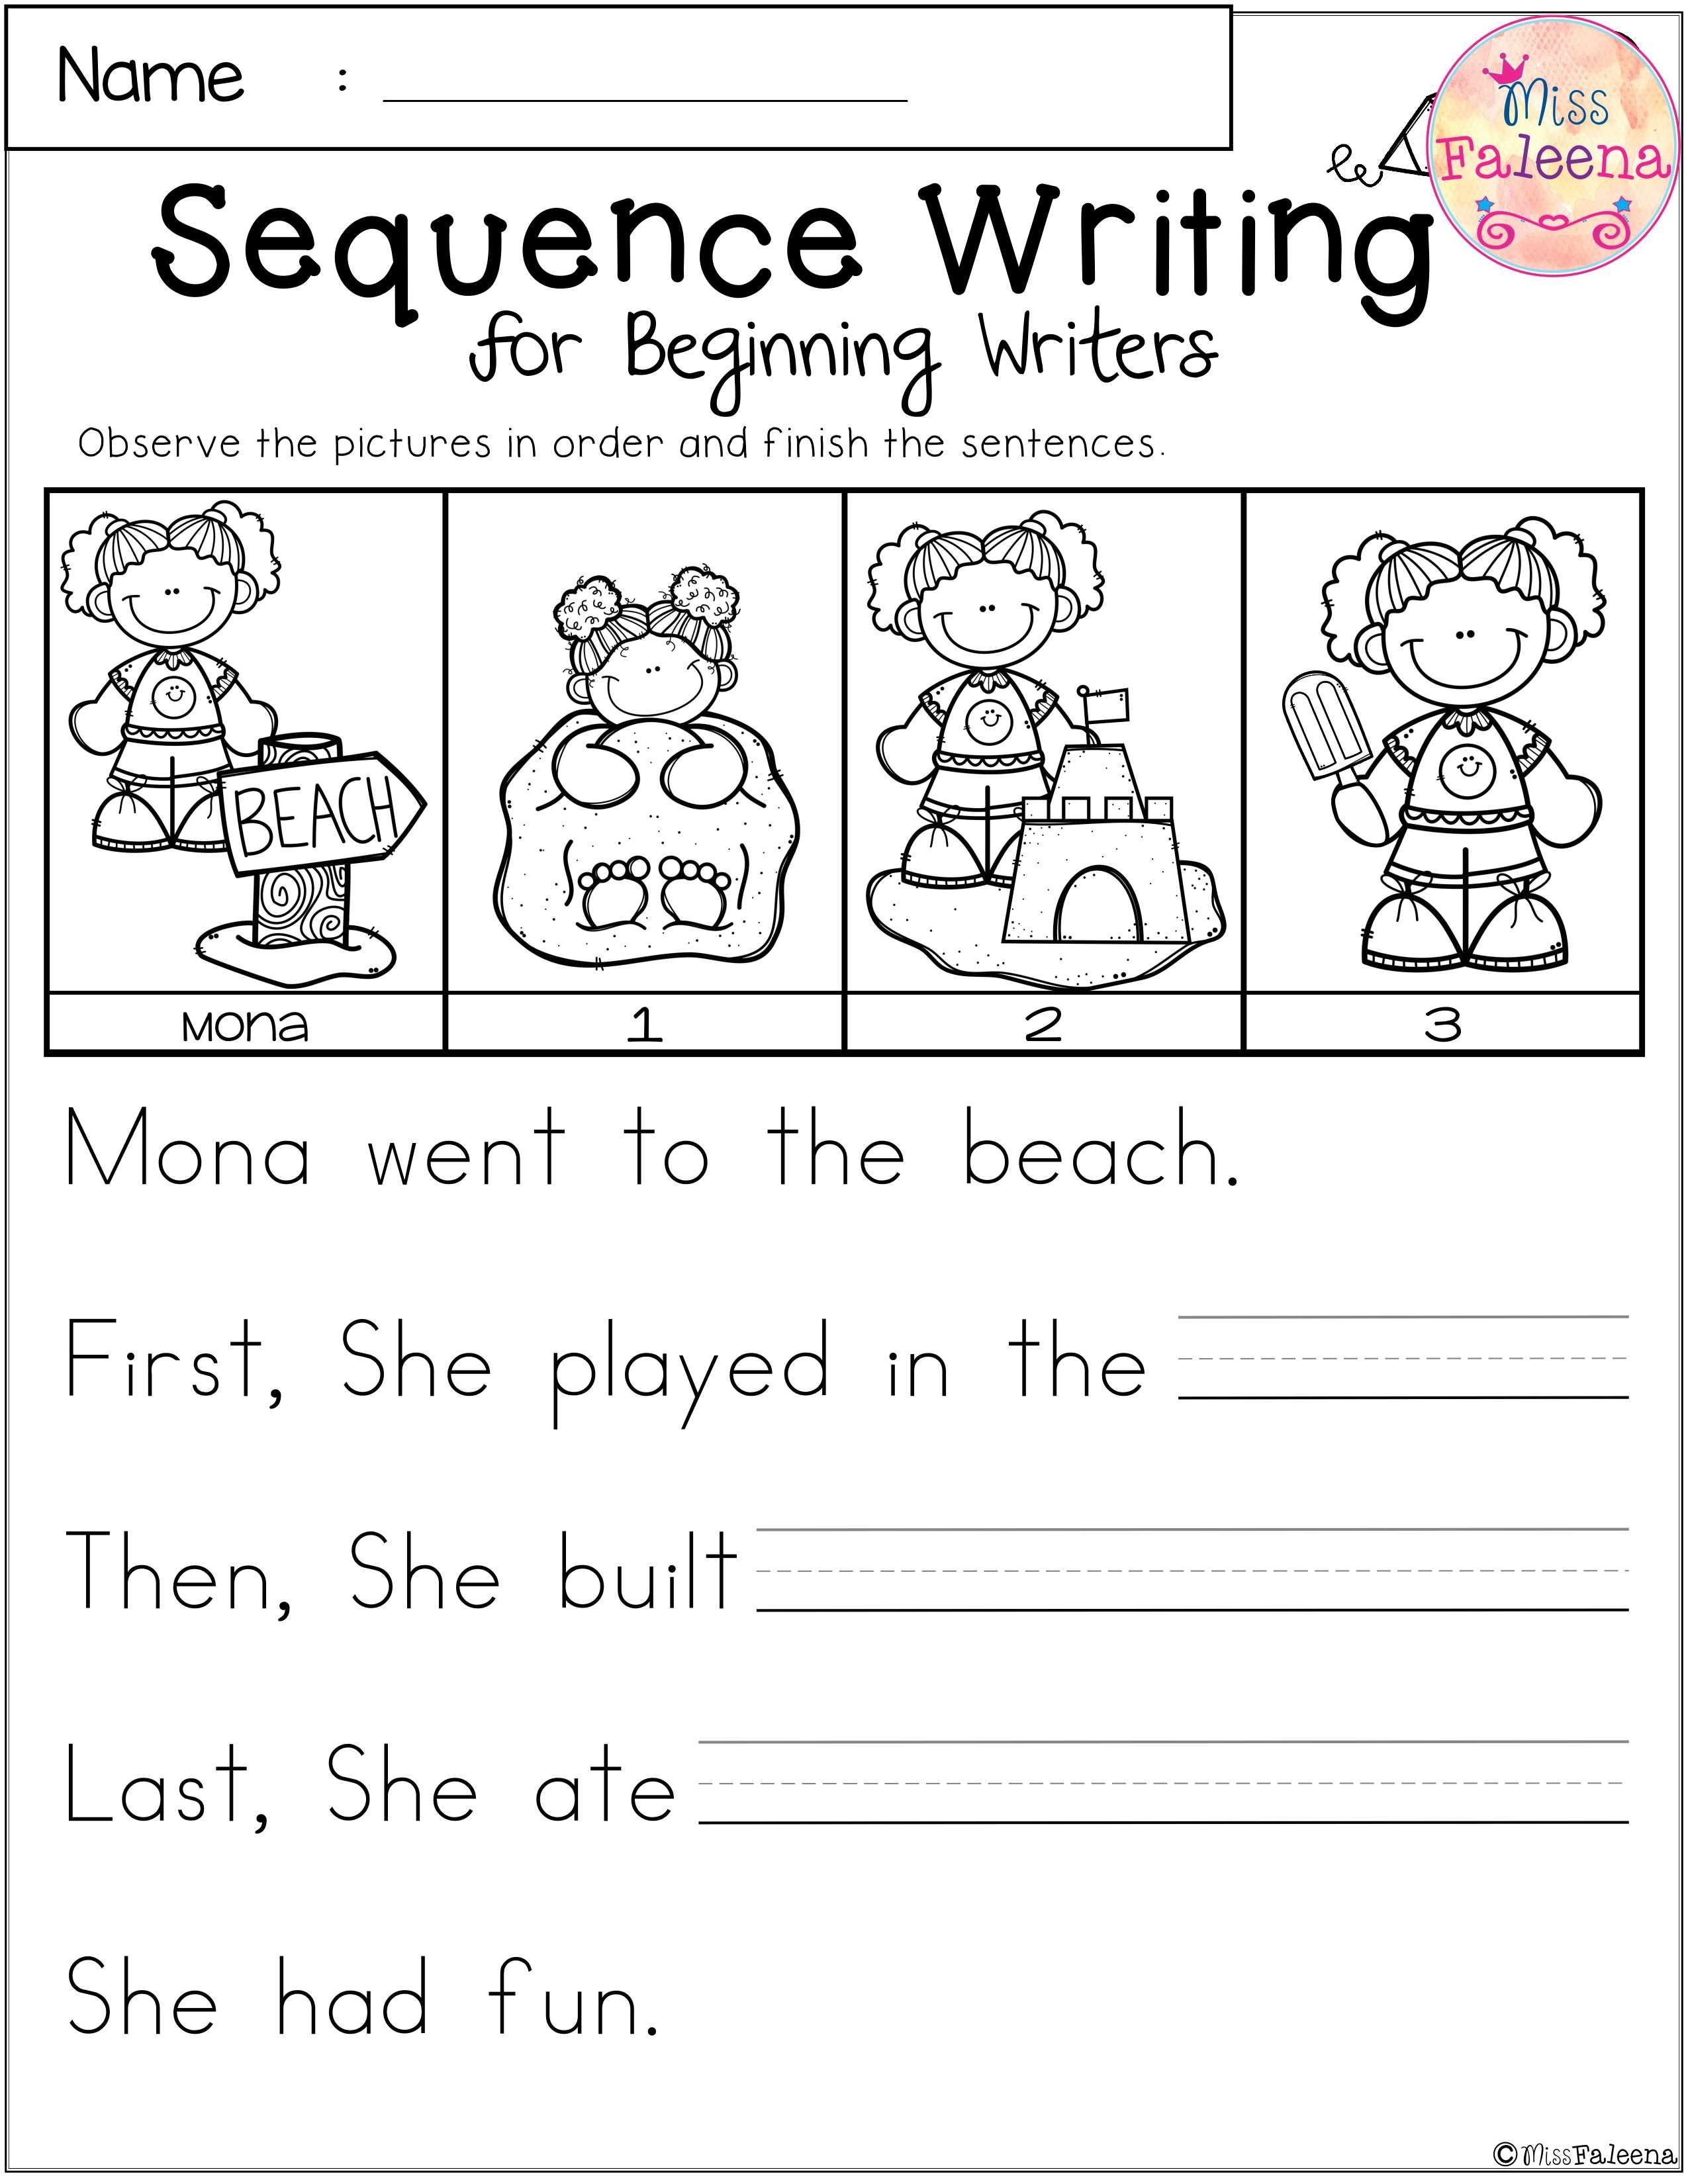 Free Sequence Writing For Beginning Writers | Dear Teachers - Free Printable Sequencing Worksheets For Kindergarten